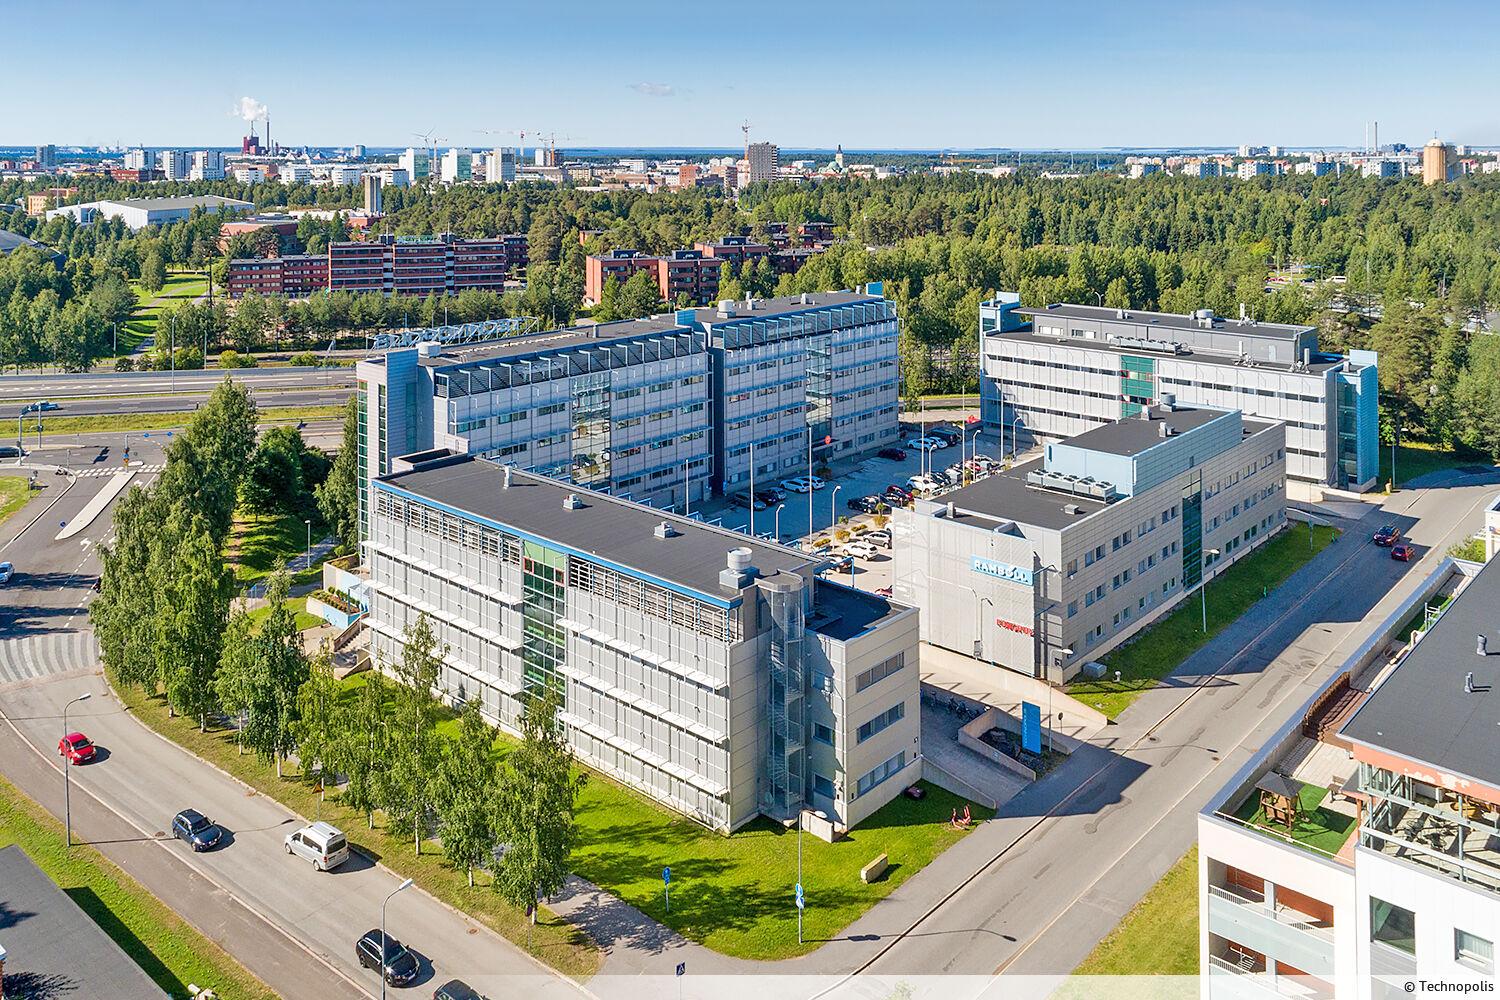 A neat 3rd floor office space for rent in Technopolis Kontinkangas campus, which in its current form consists of an open space. The property offers excellent services for its tenants.